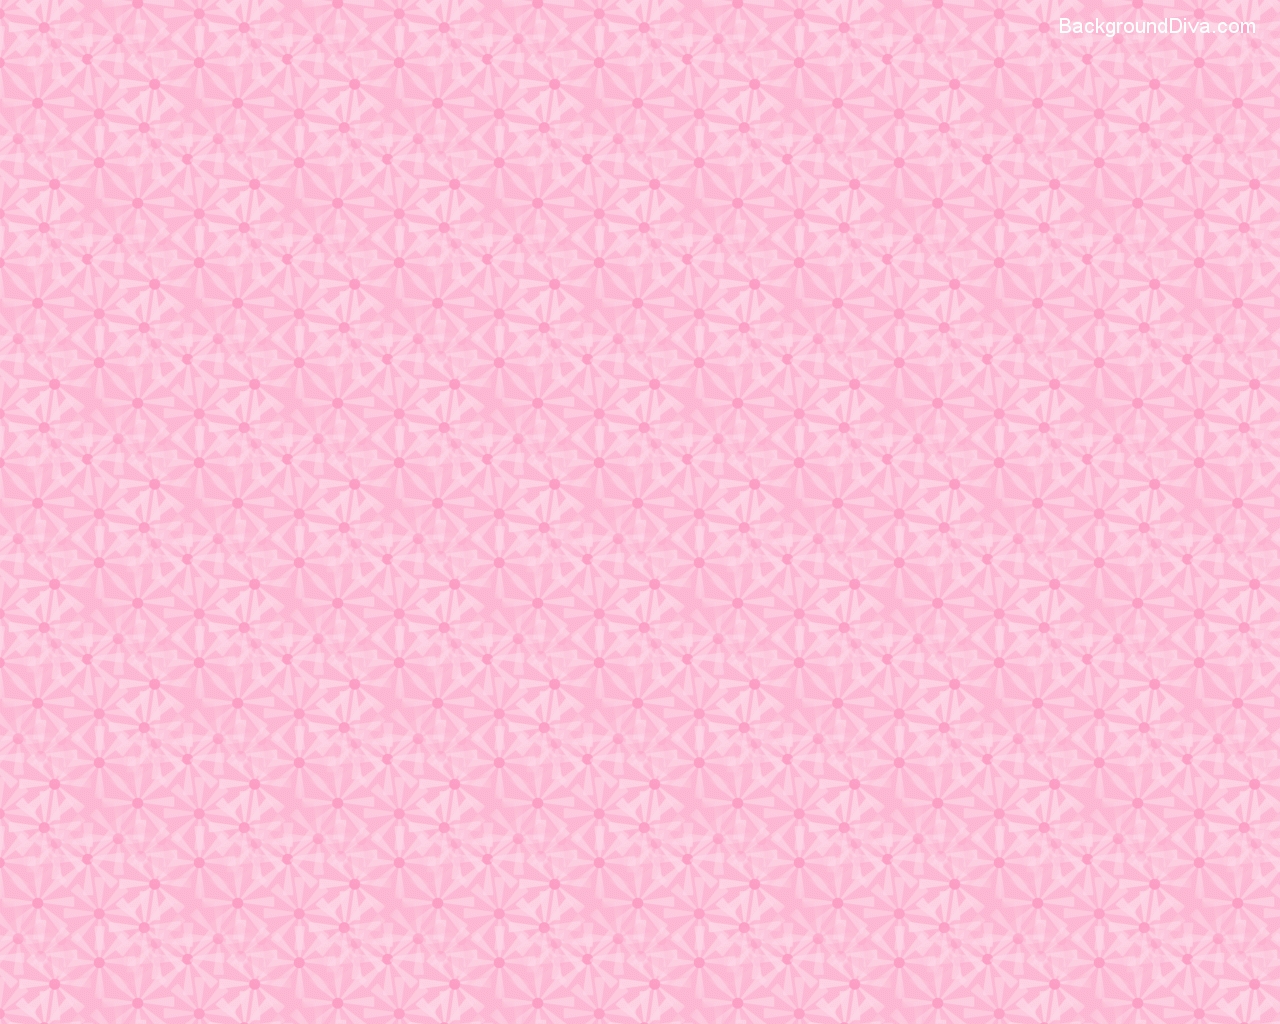 10 Top Soft Pink Background Images FULL HD 1080p For PC Desktop